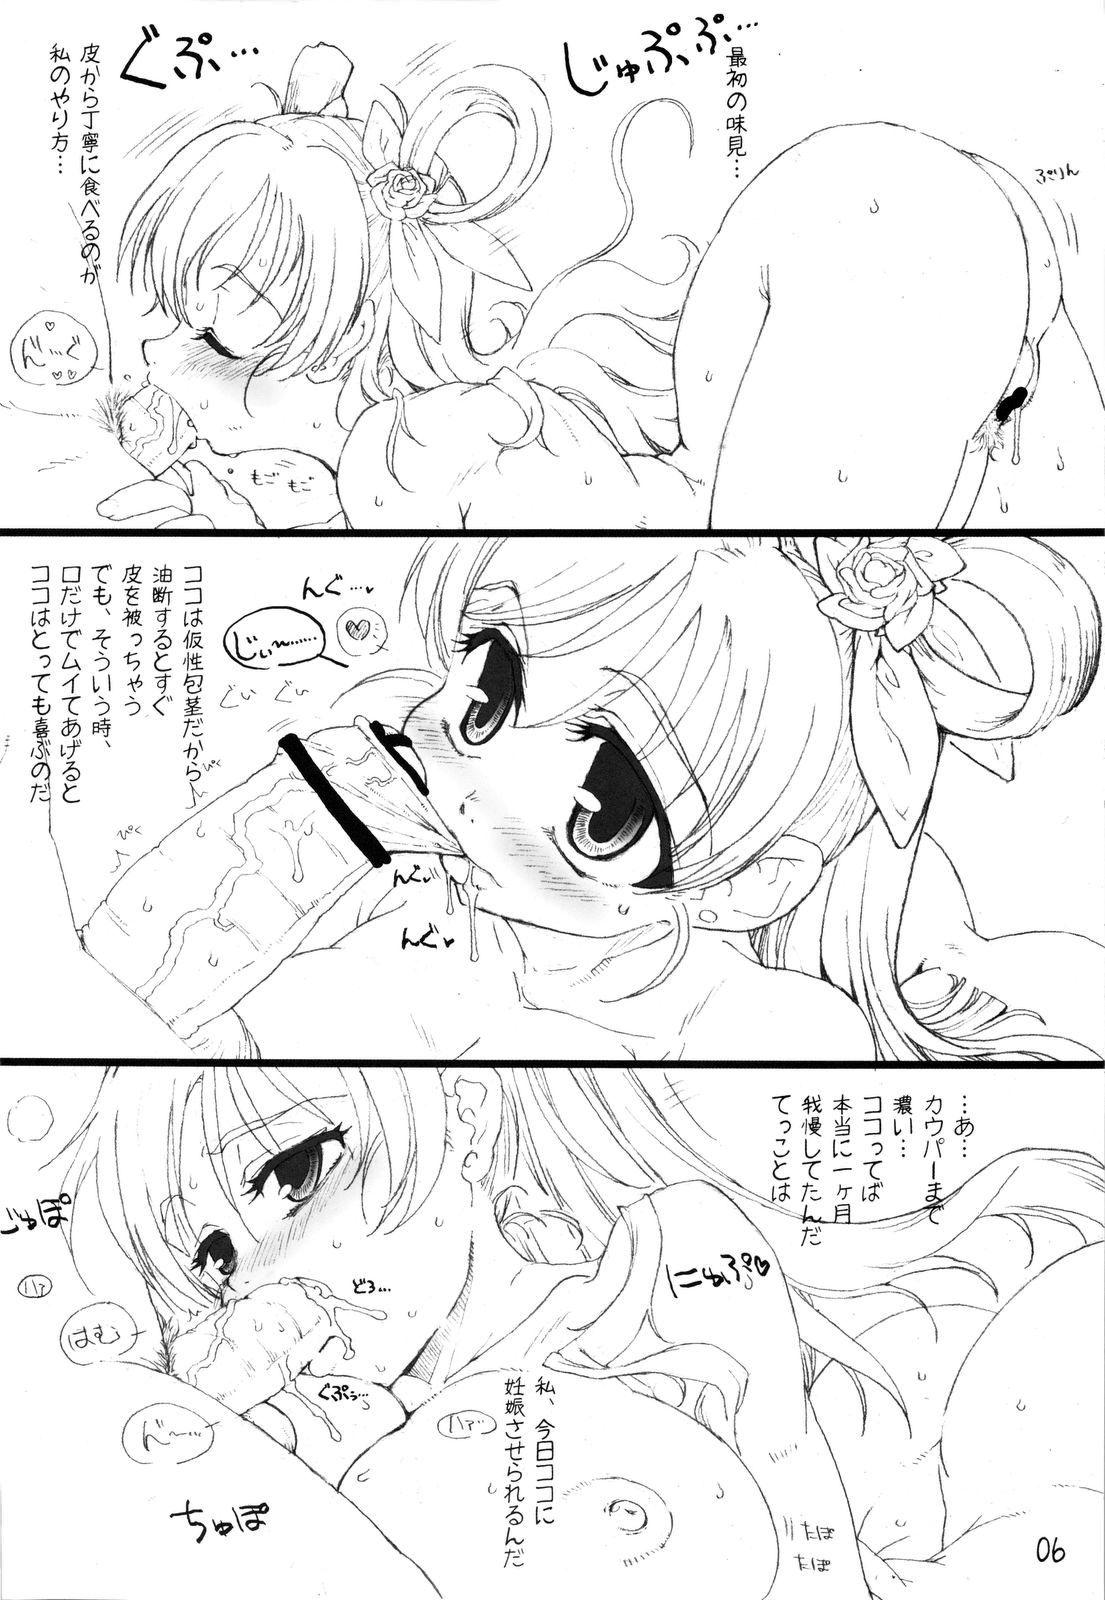 Bokep Dream to Issho! - Yes precure 5 Guys - Page 6